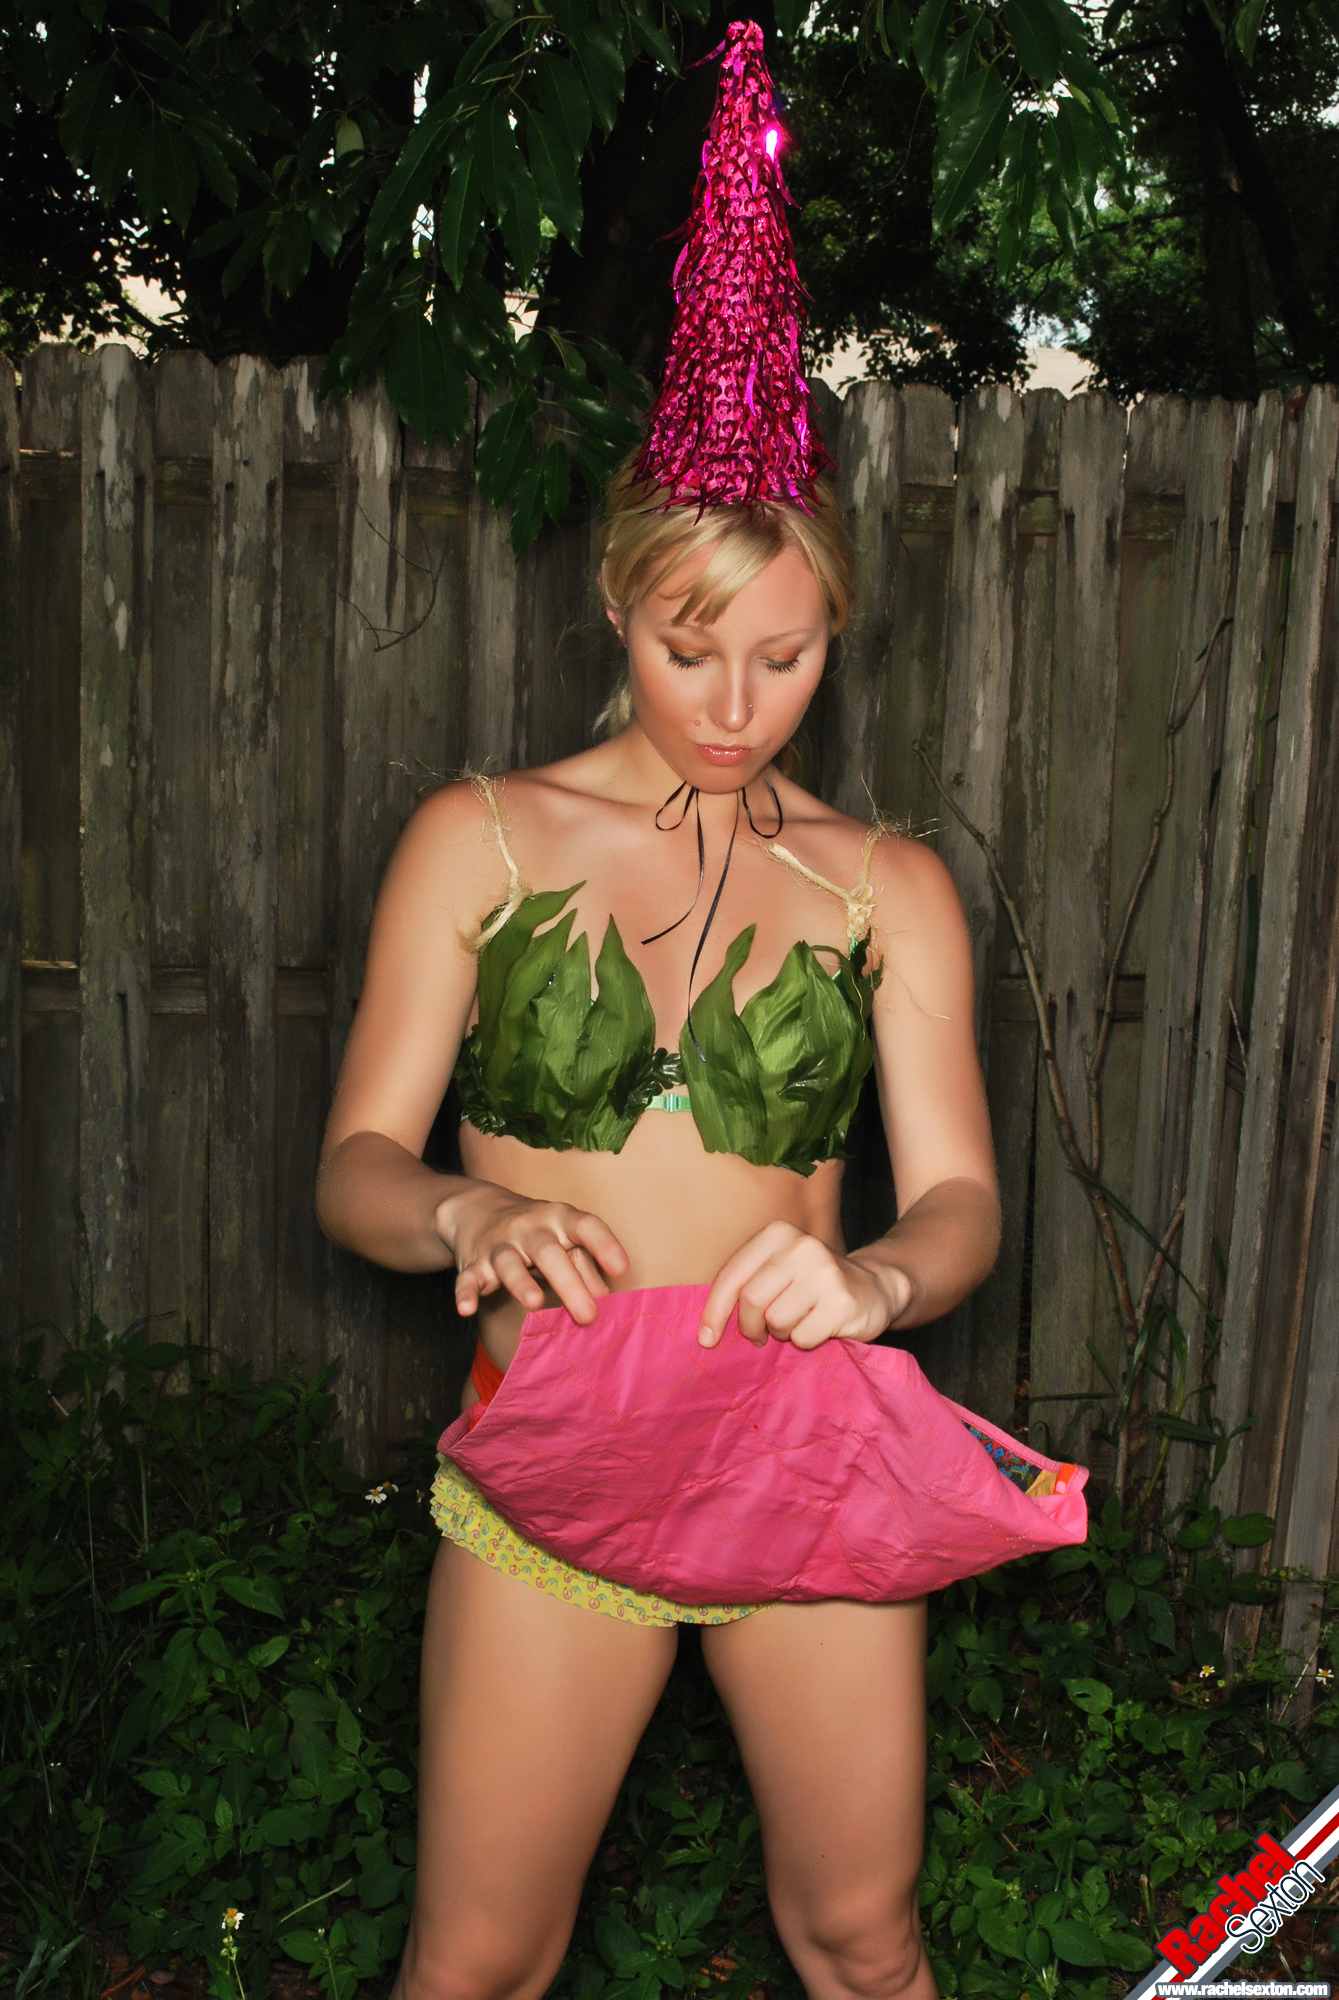 Rachel Sexton Is Gnome Alone Stripping In The Yard 206208 photo